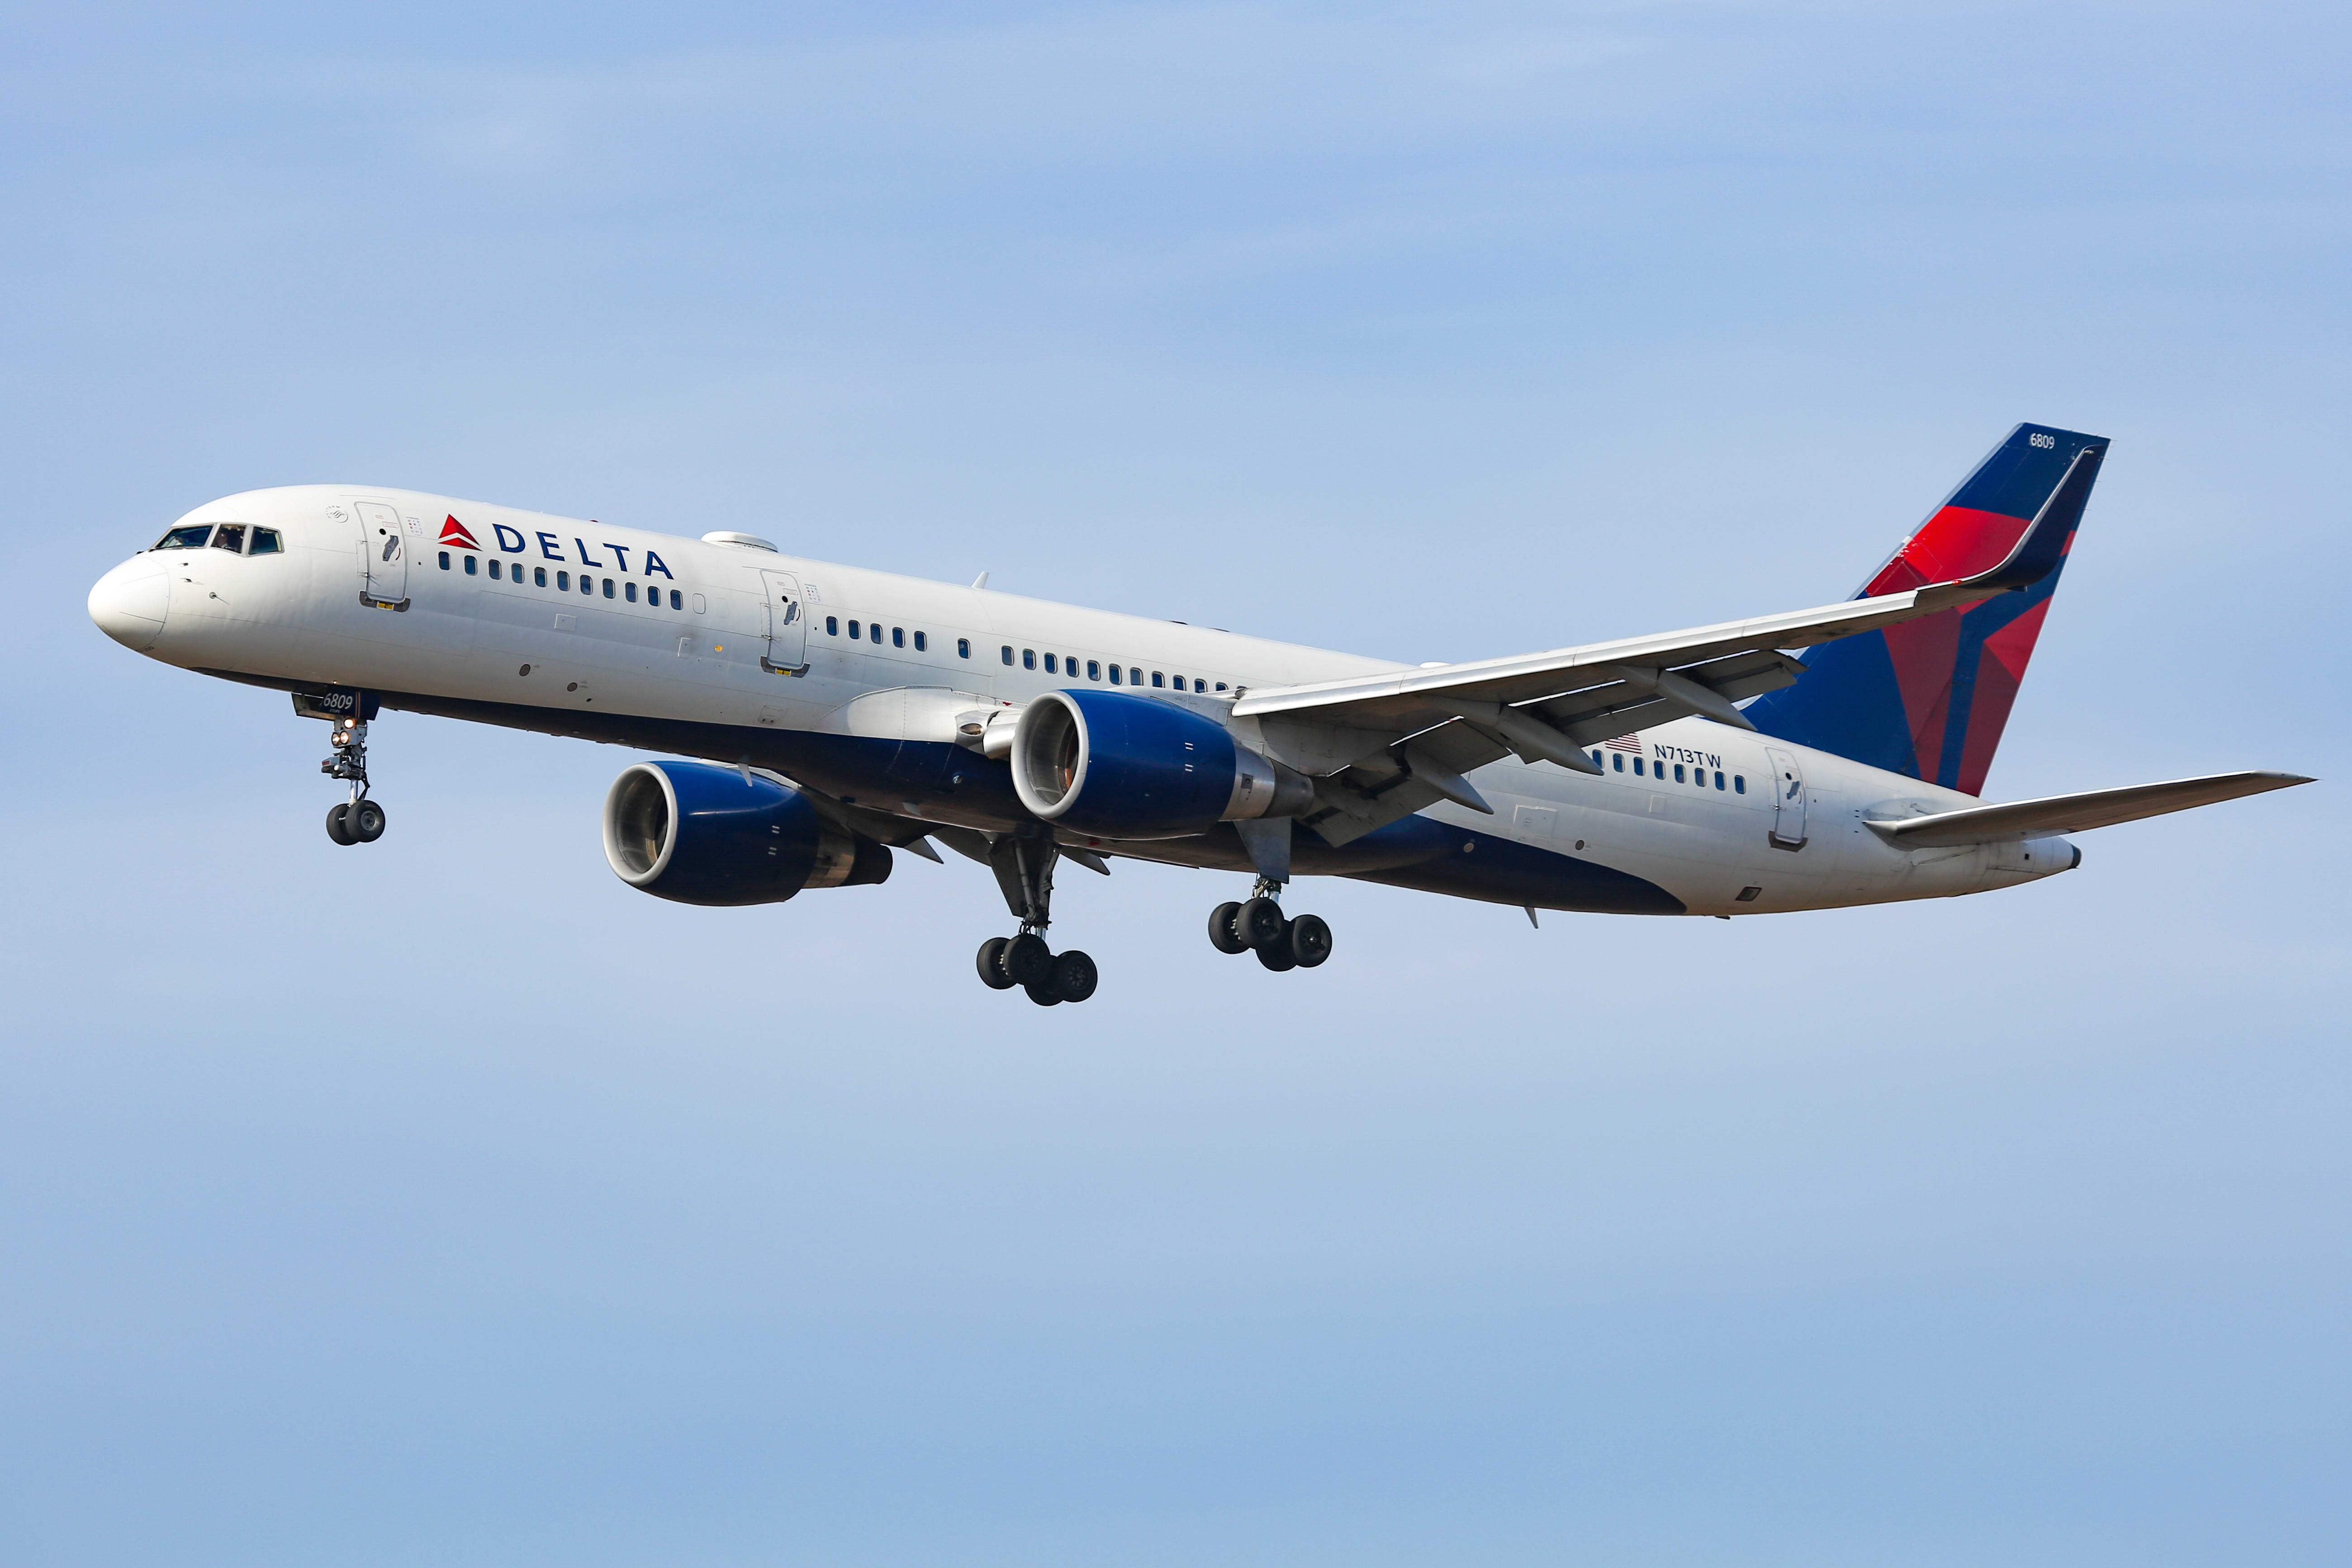 Delta distributes bonuses to managers whose salaries have been cut in the pandemic